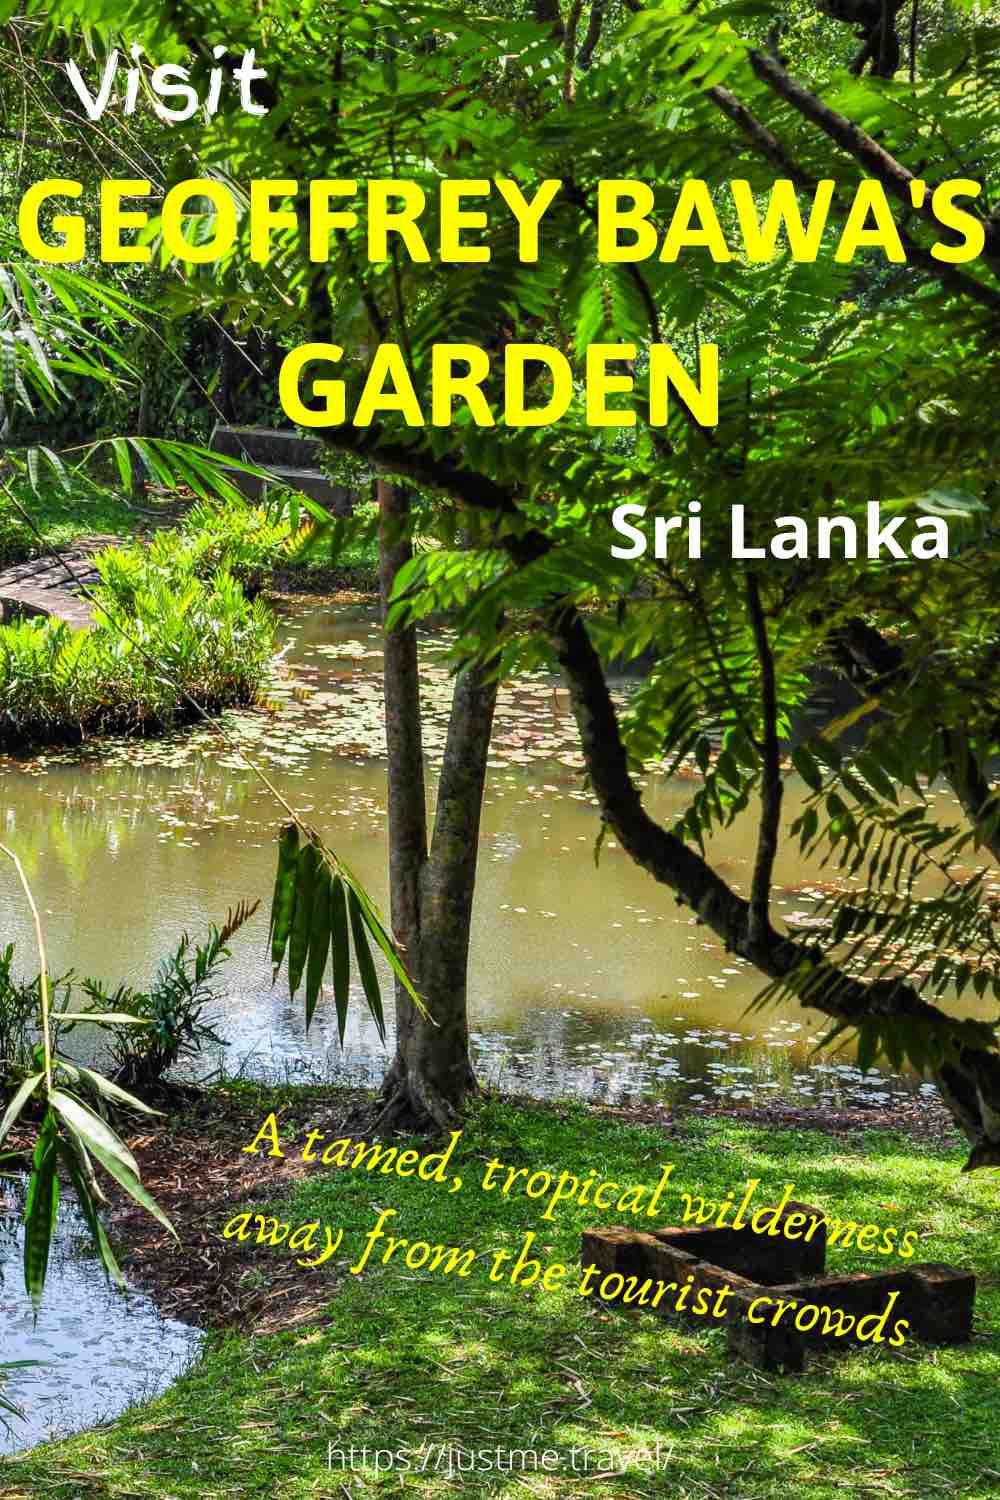 A pond surrounded by tropical forest. The writing on the image states, Visit Geoffrey Bawa's Garden in Sri Lanka.